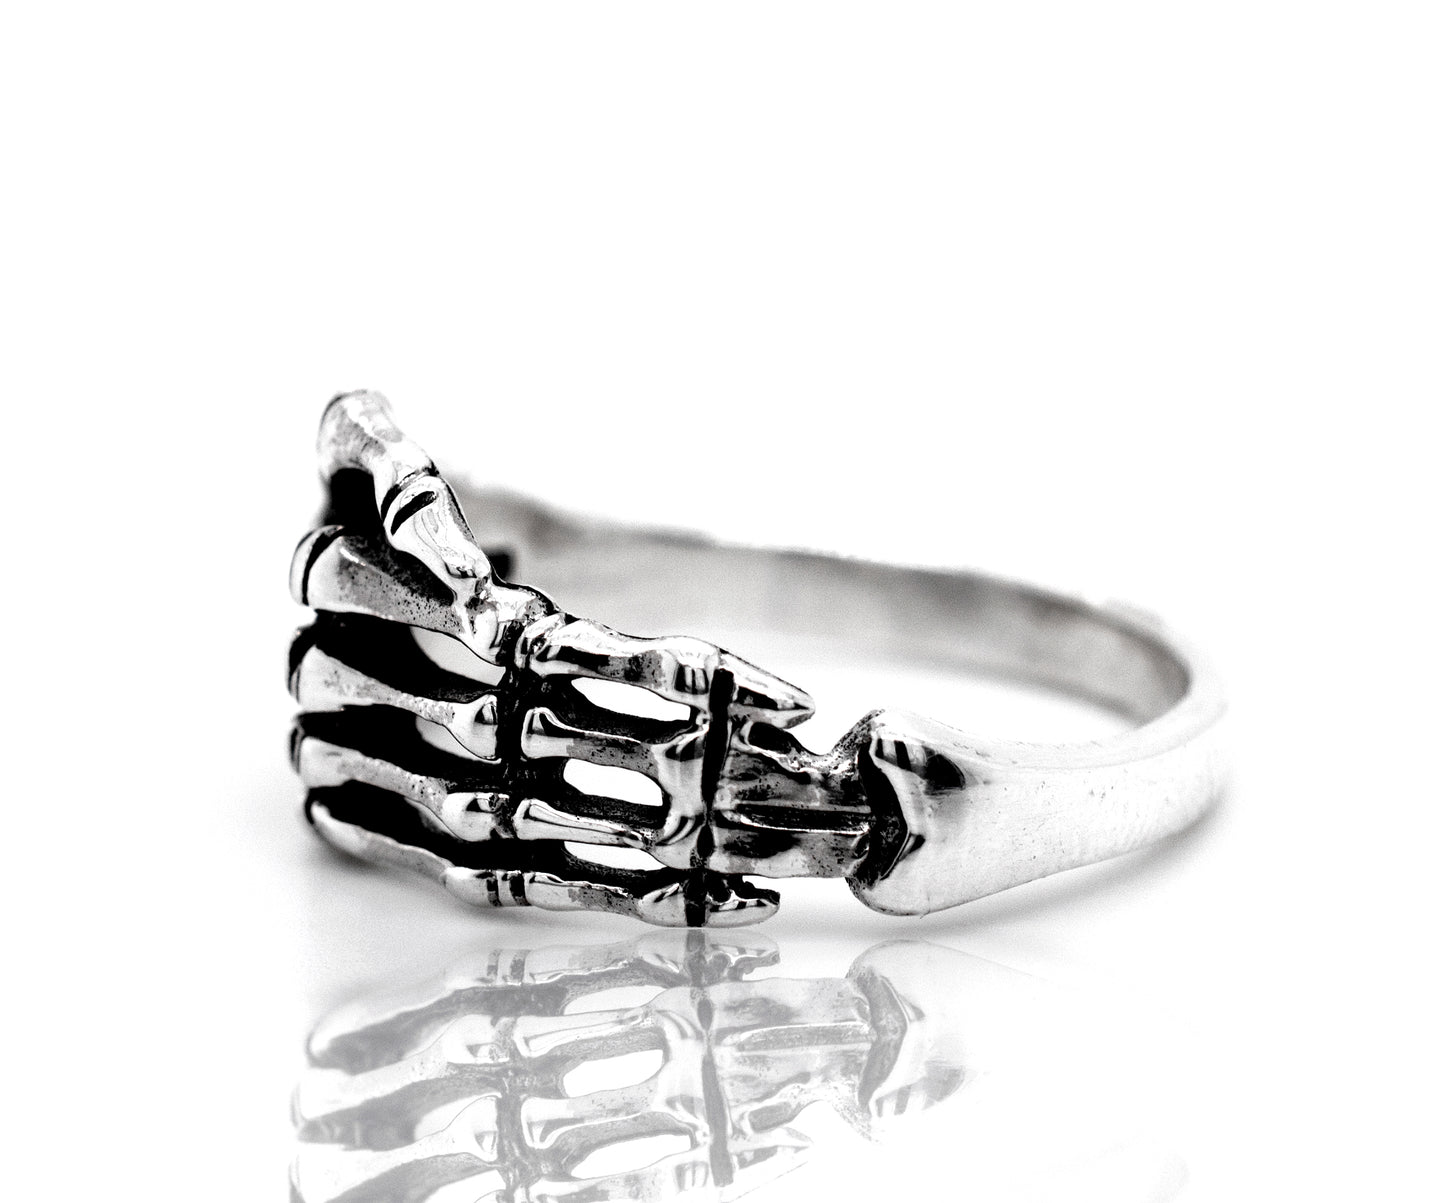 A sterling silver Skeleton Hand Ring with a skeleton hand design.